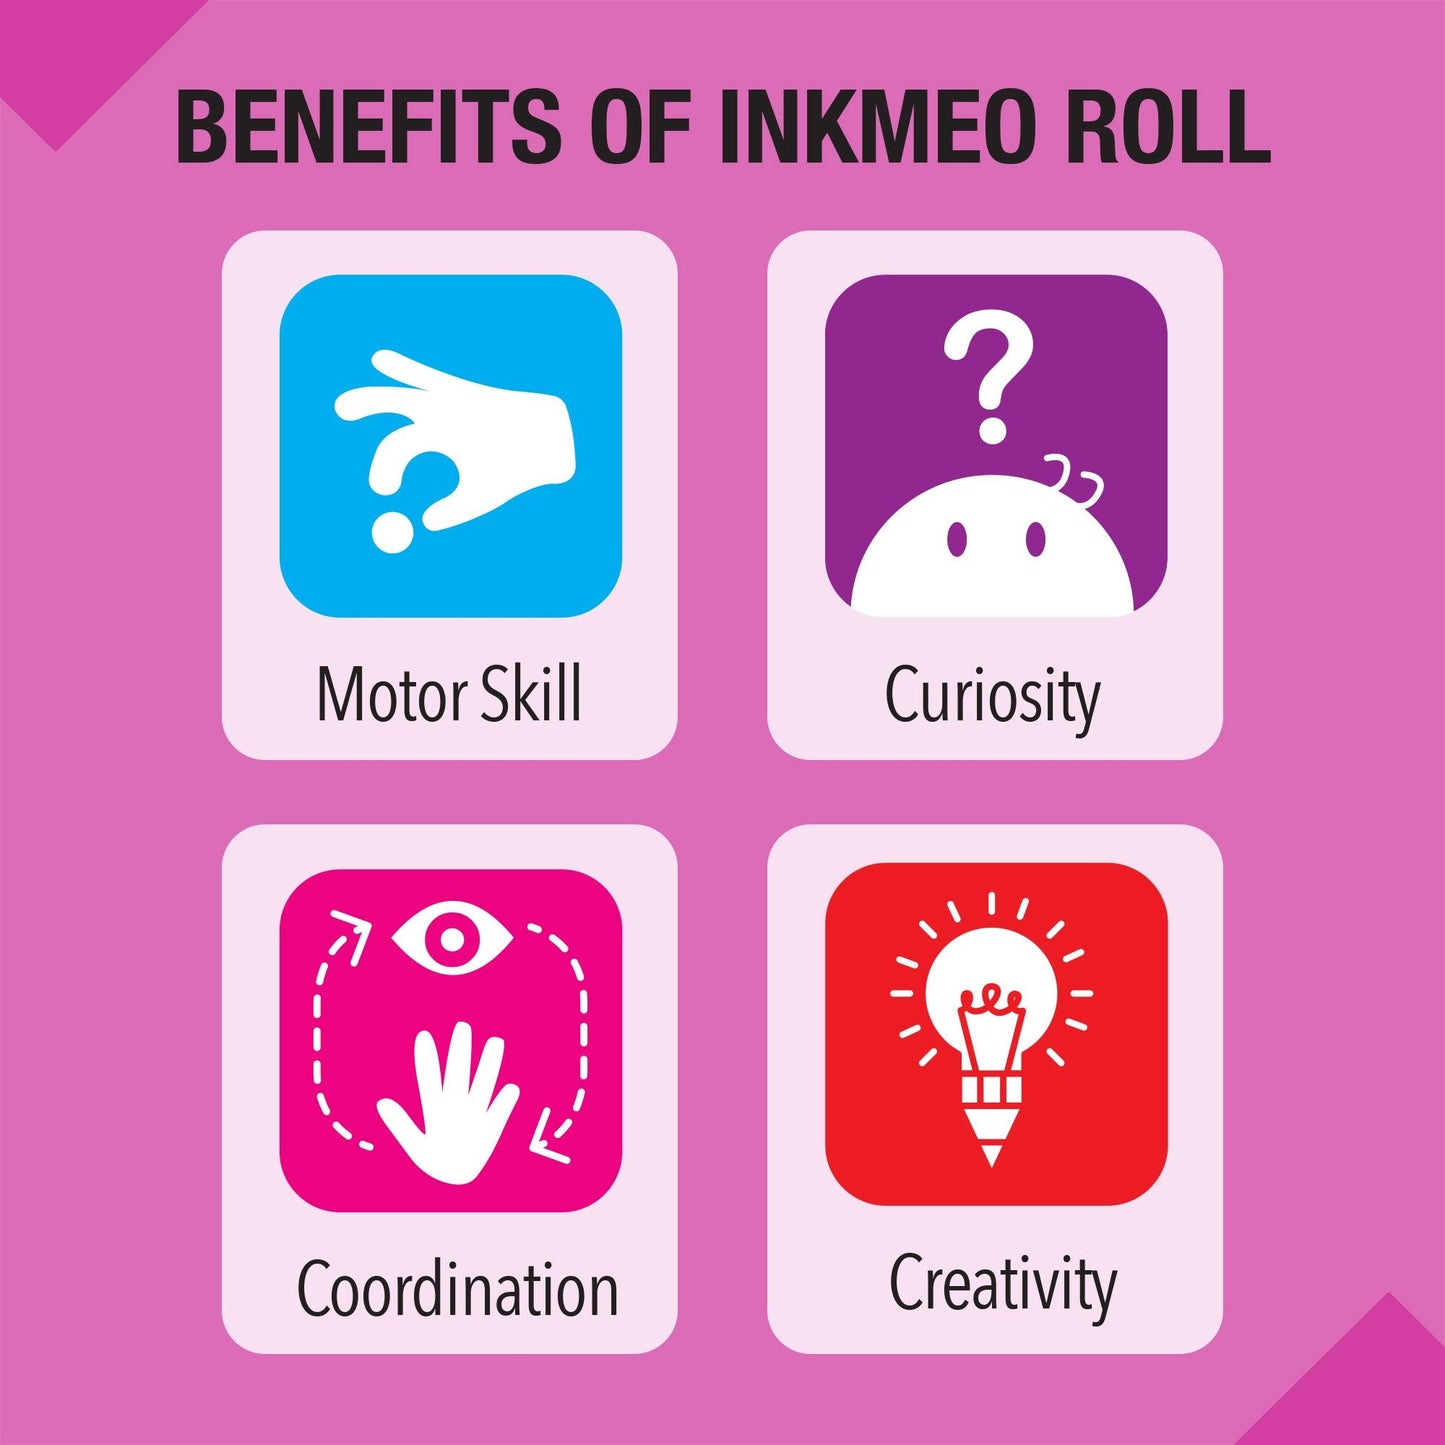 The shows a pink background with text write as benefits of inkmeo roll such as motor skills, curiosity, eye hand coordination and creativity